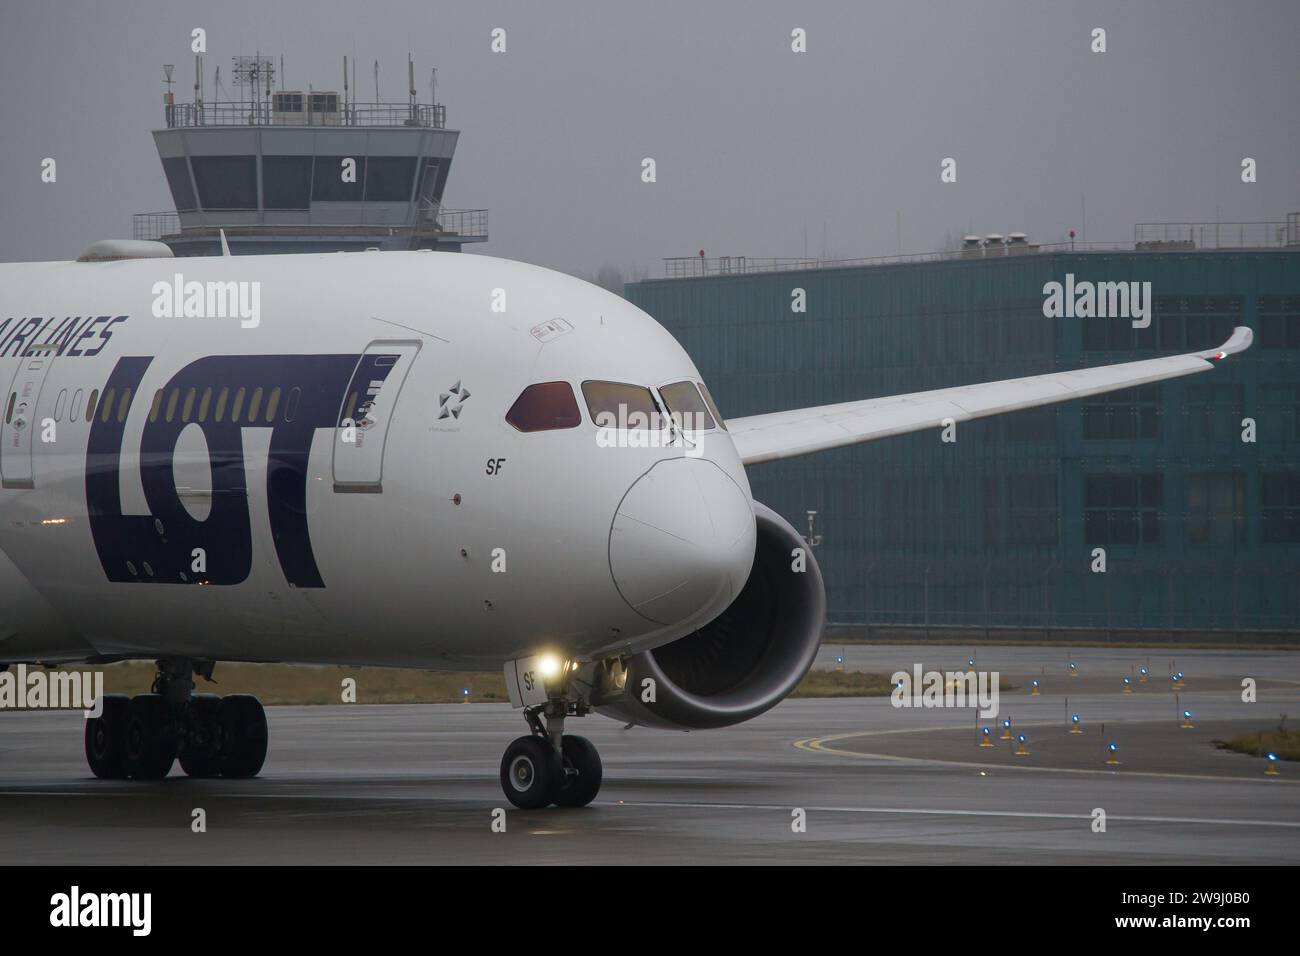 LOT Polish Airlines Boeing 787-9 aircraft close-up while taxiing for takeoff from Lviv International Airport, leaving for Warsaw Stock Photo